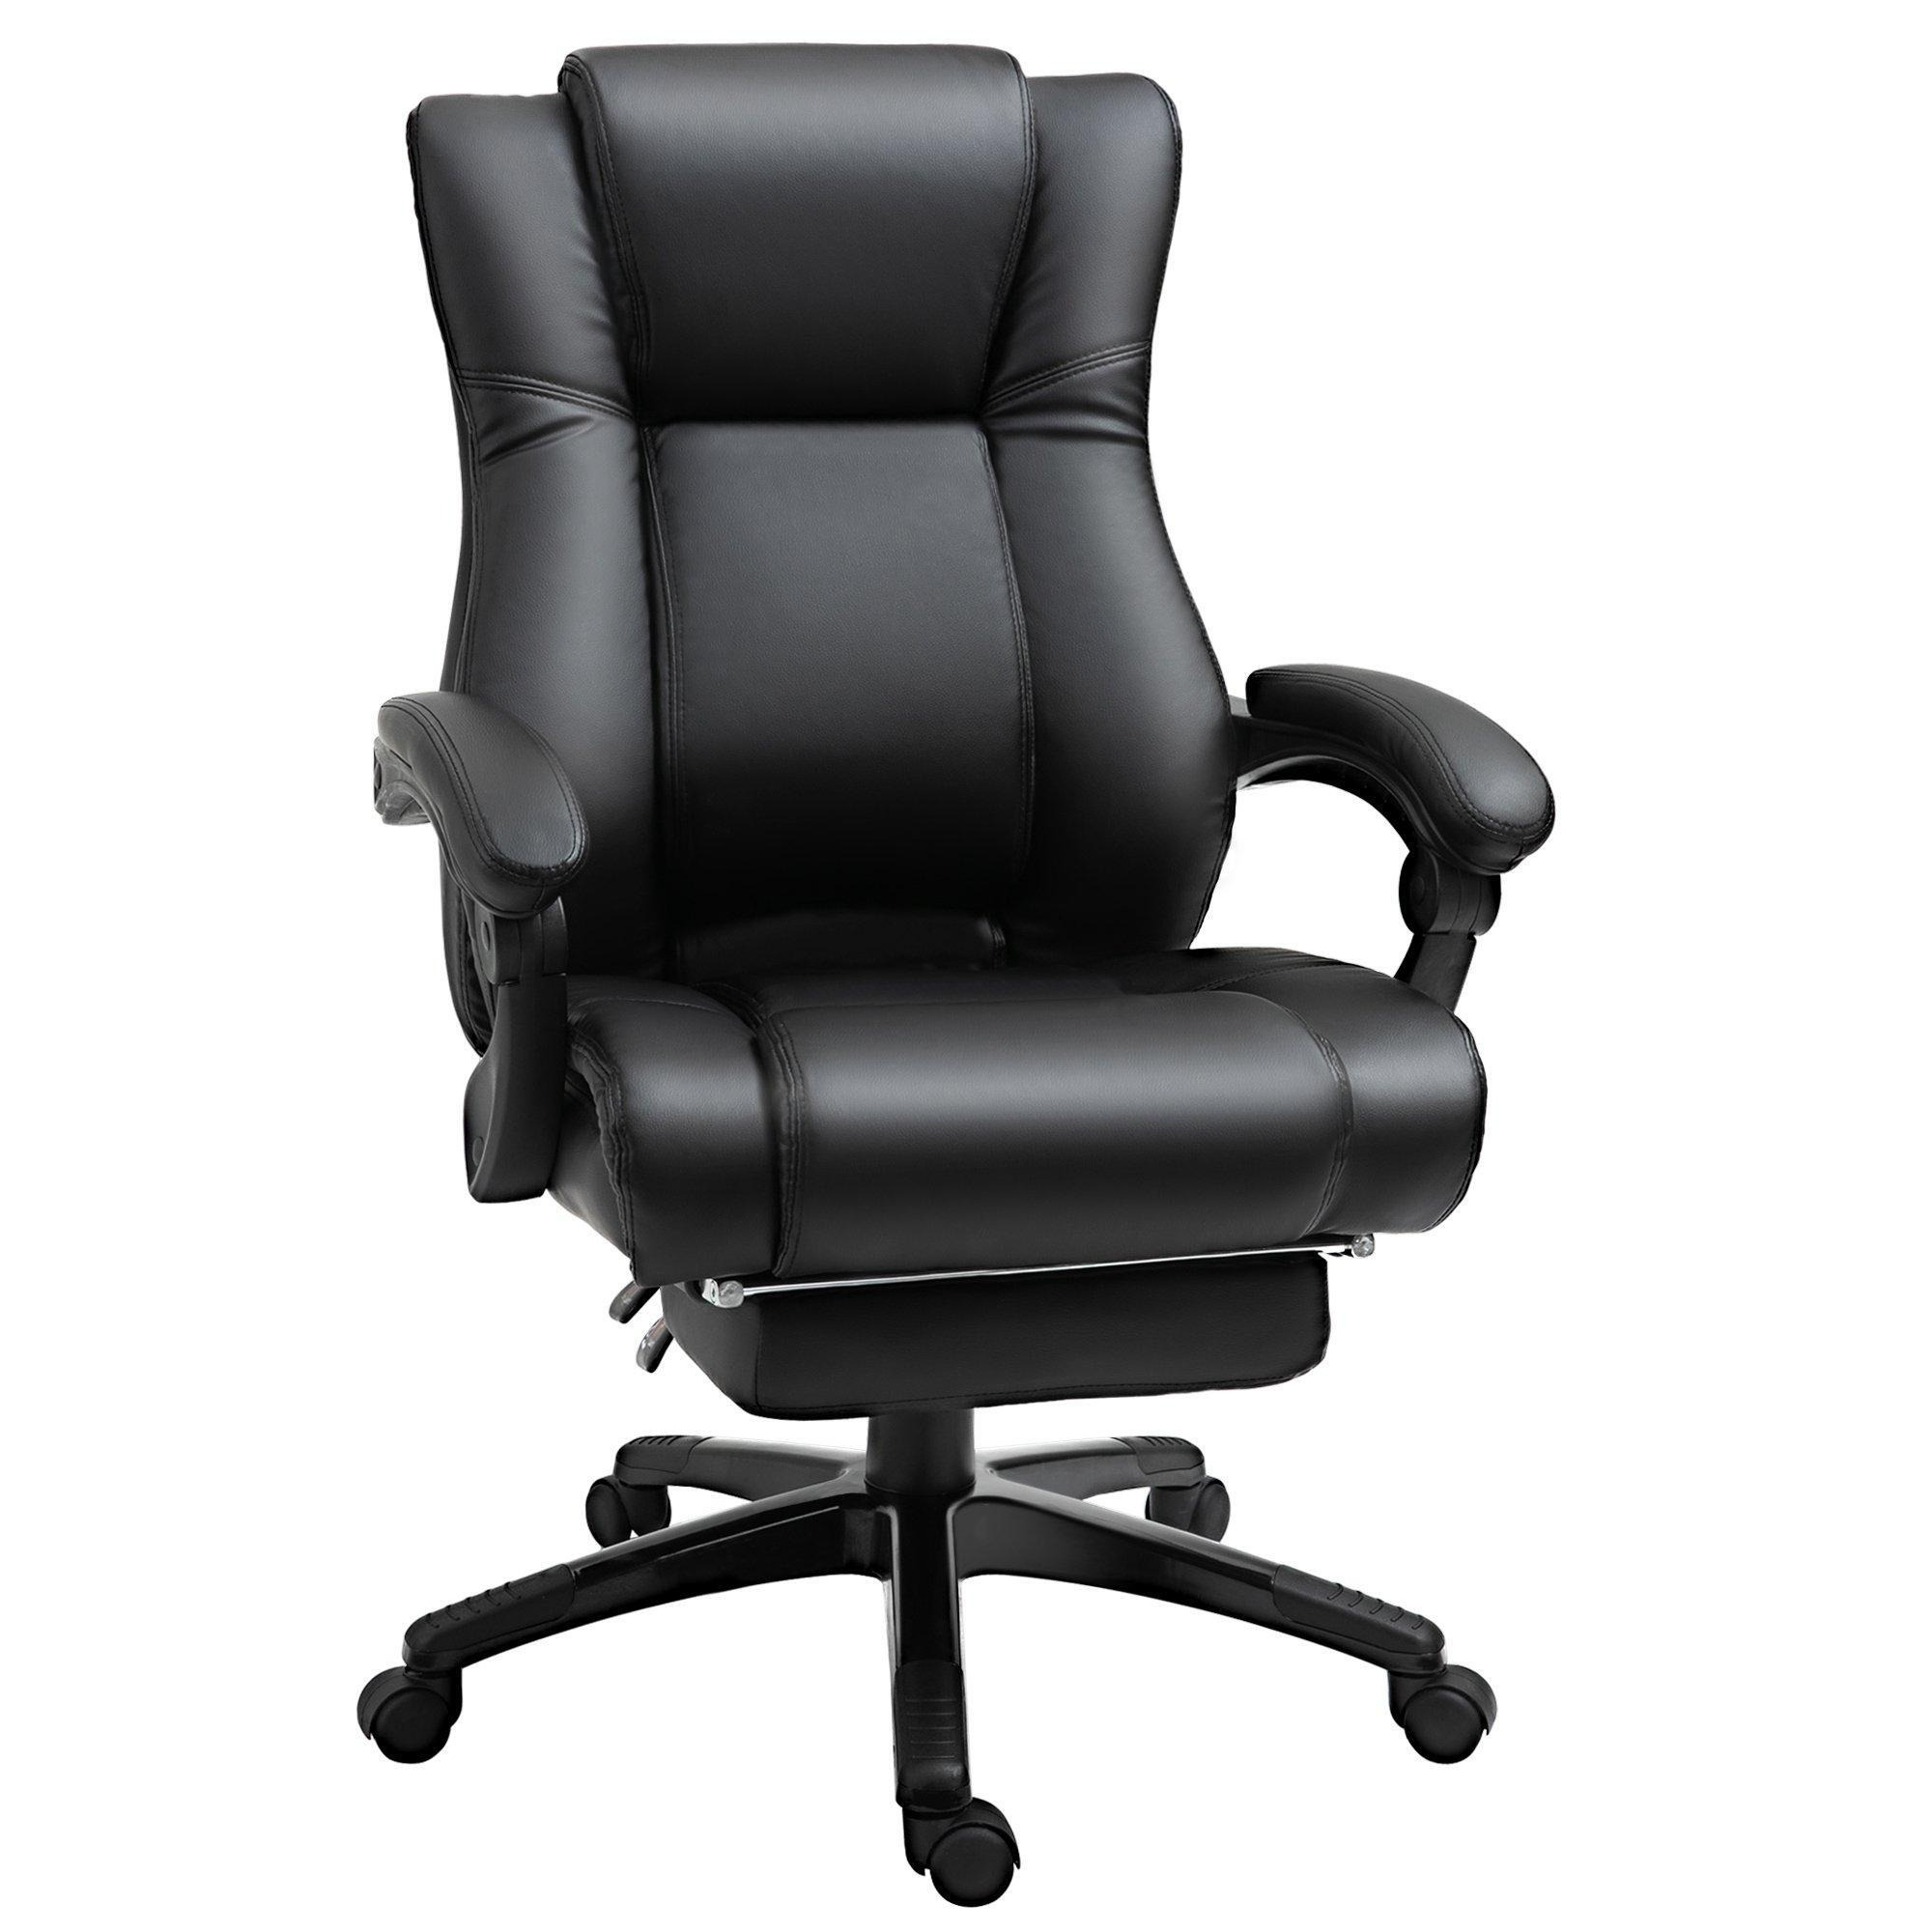 Executive Home Office Chair PU Leather Desk Chair with Foot Rest - image 1